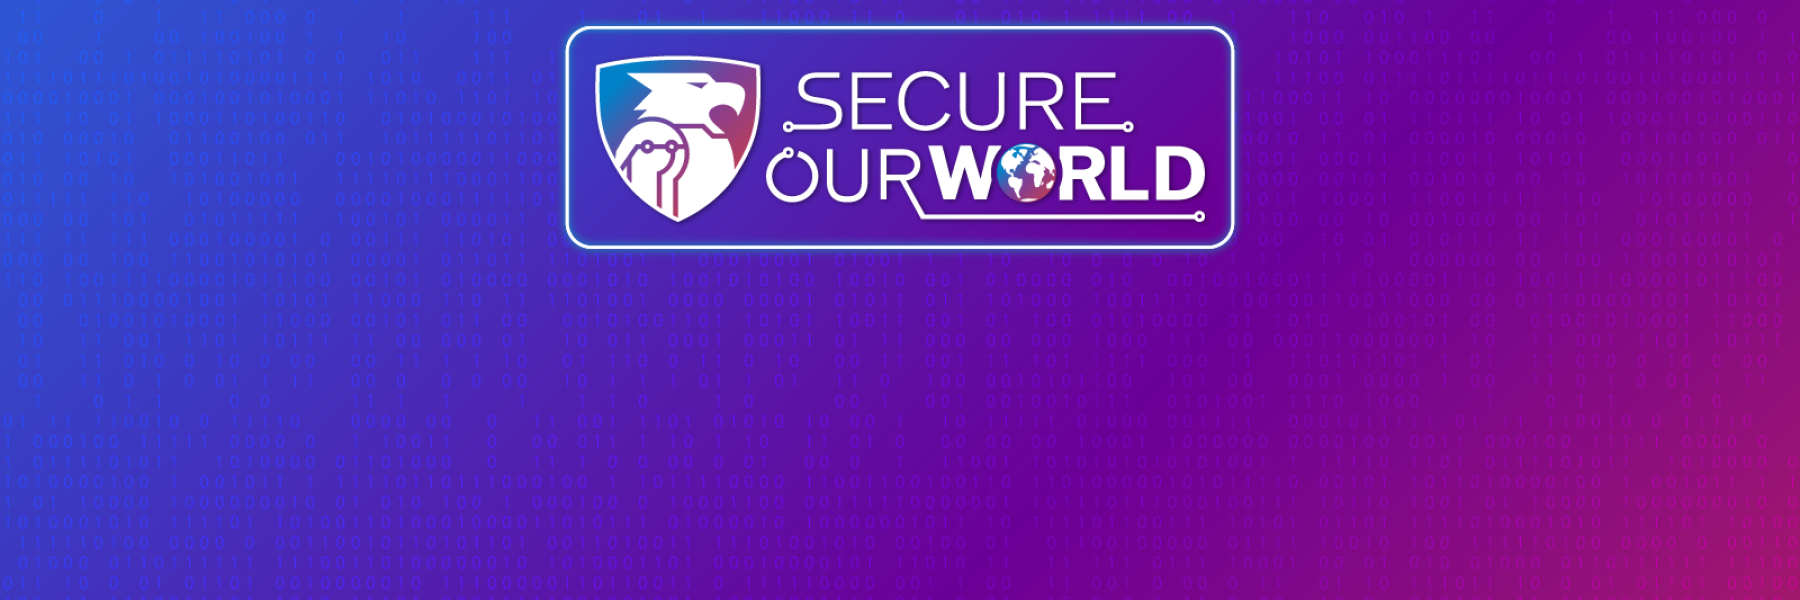 Secure Our World Hero Image